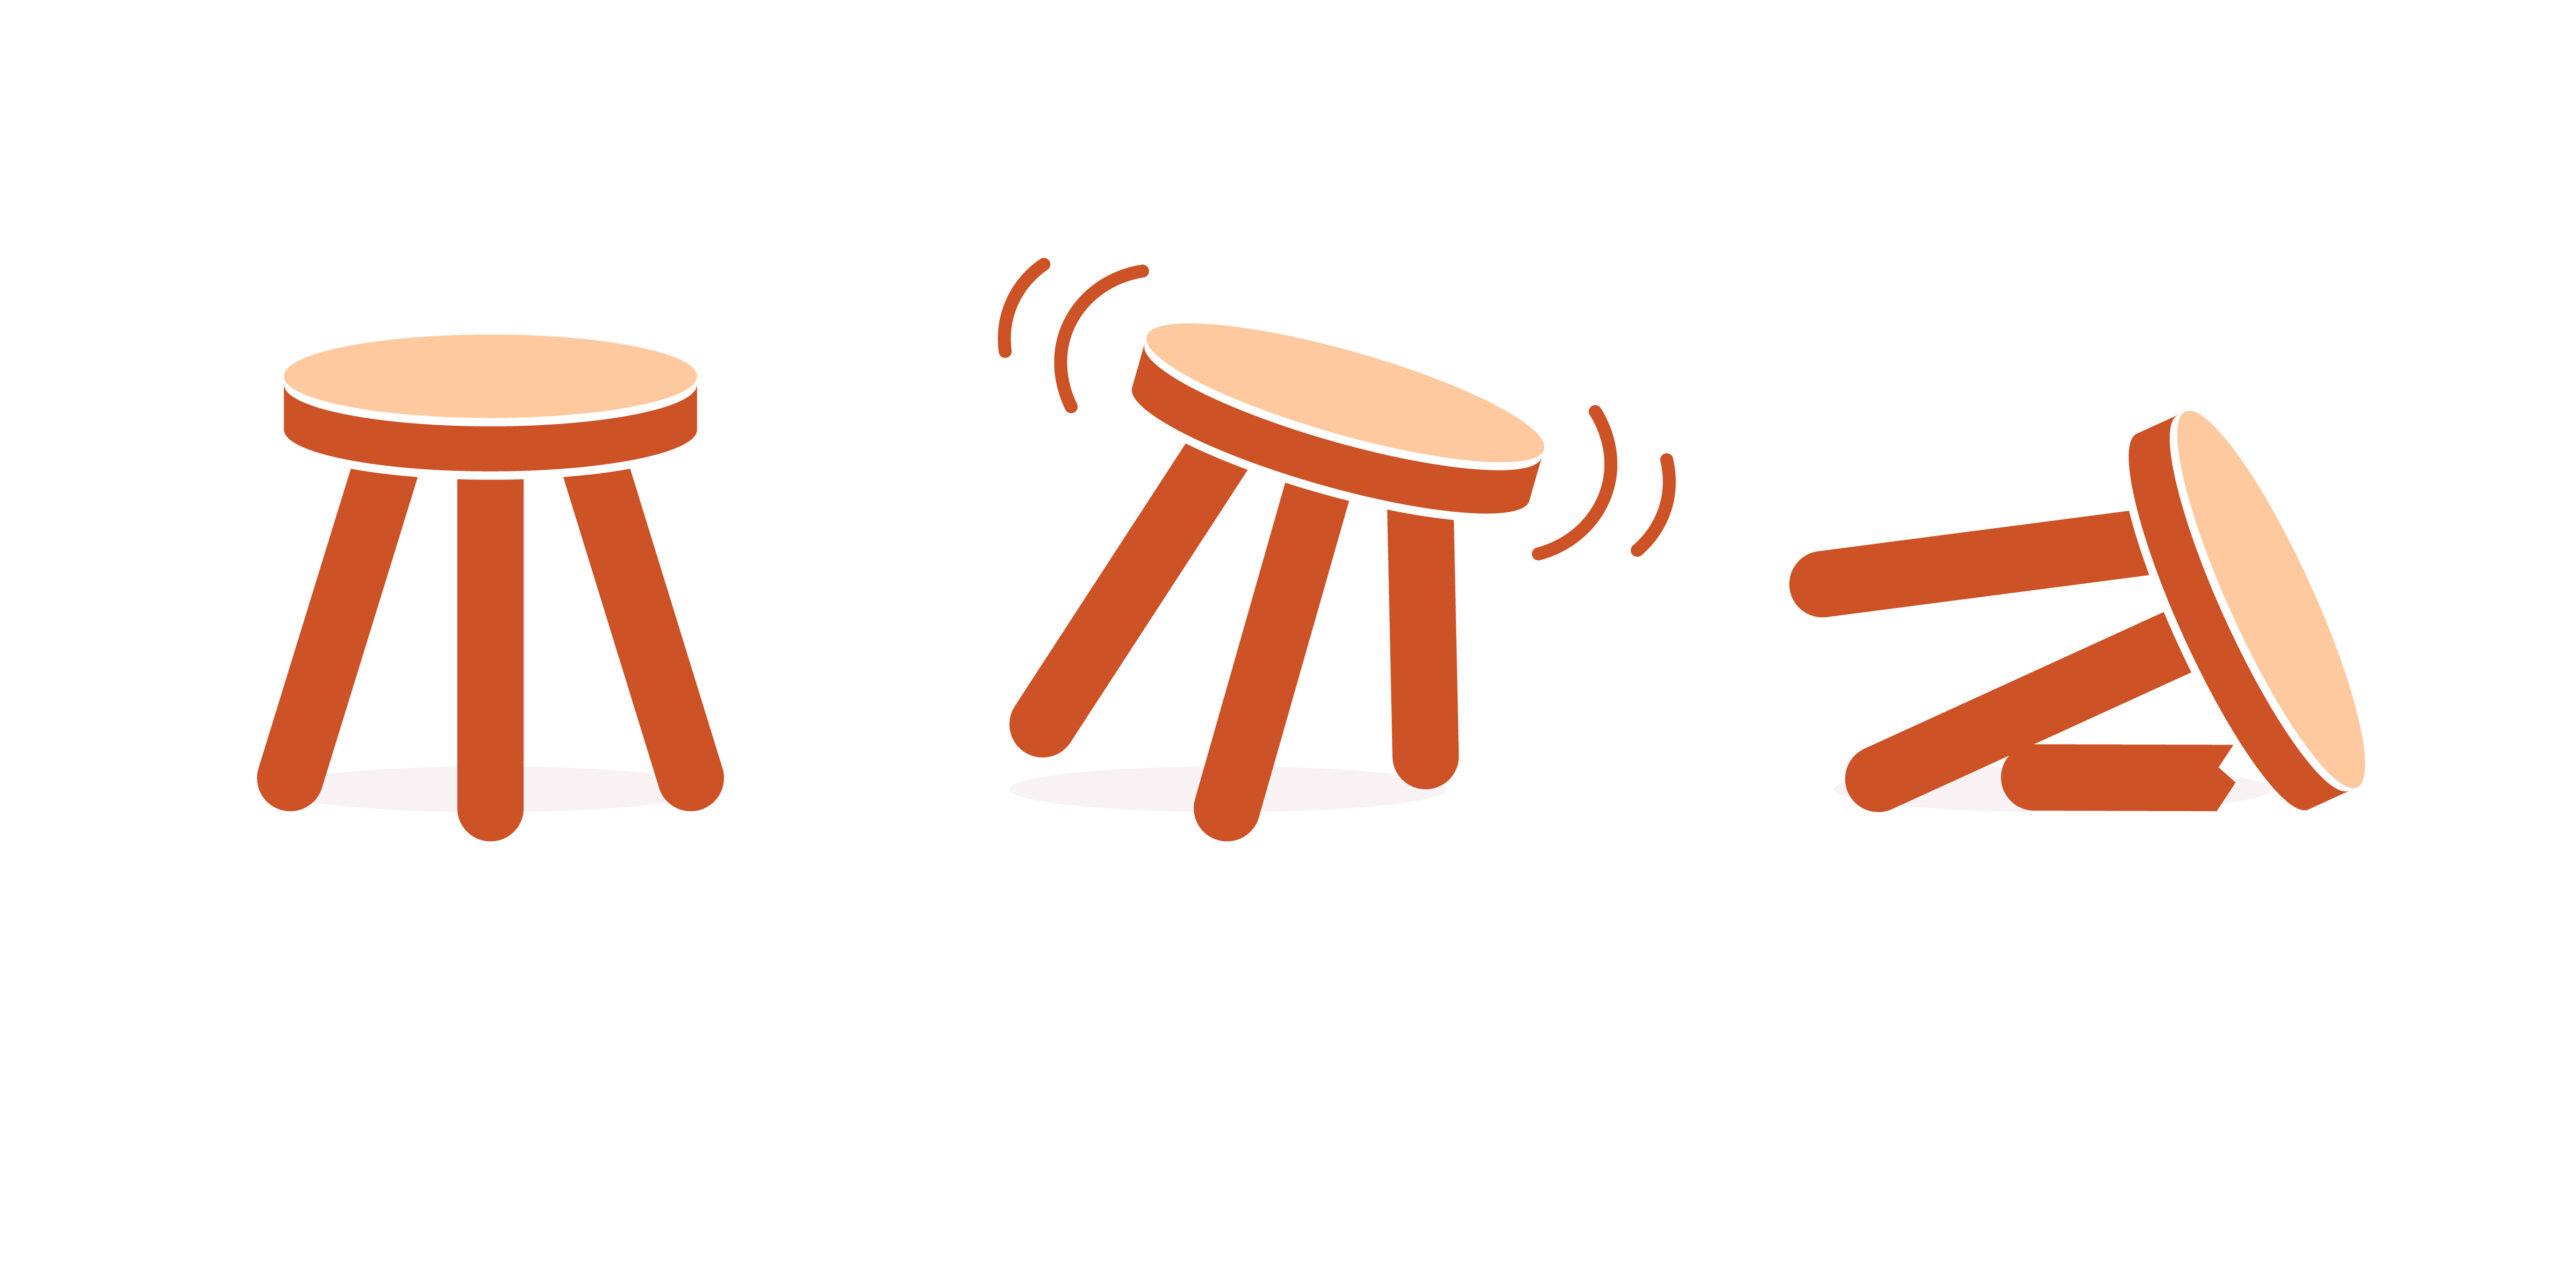 The Immune System And Autoimmune Diseases - The 3-Legged Stool That Supports Good Health